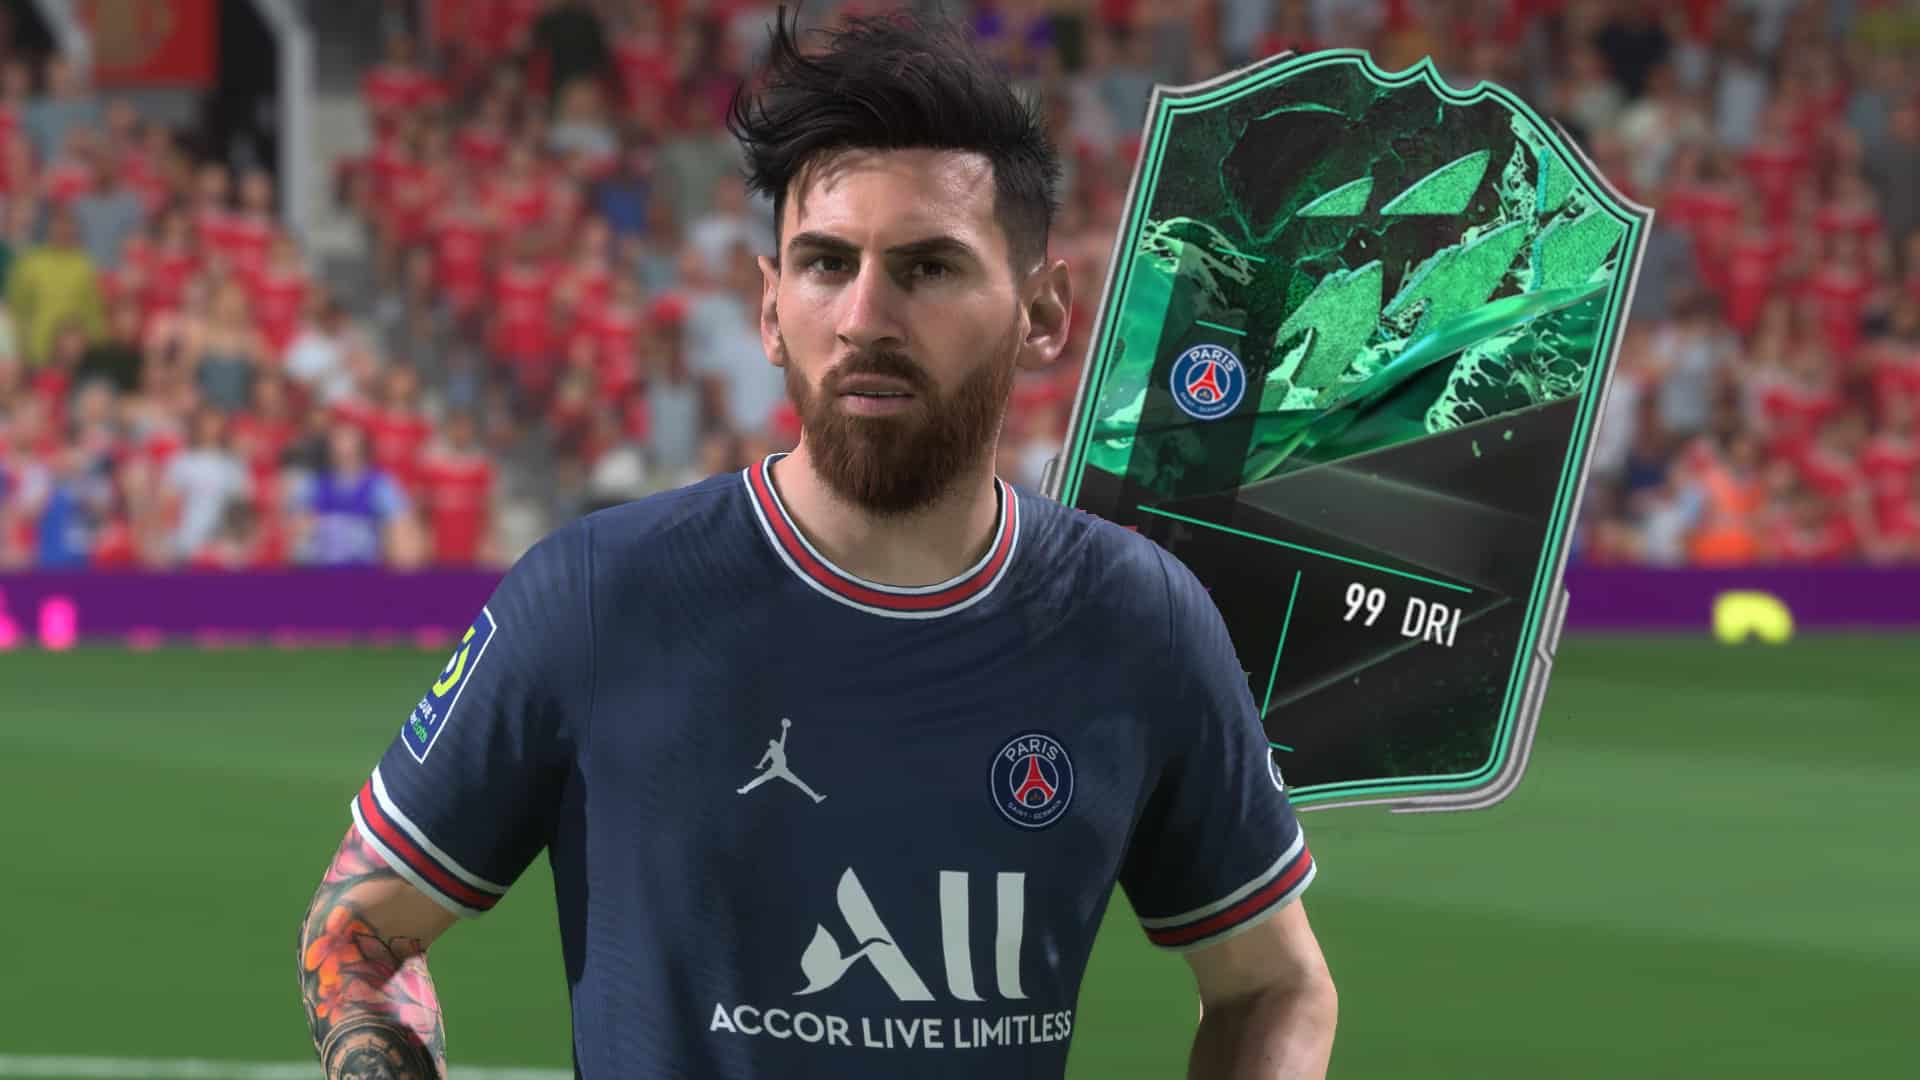 FIFA 22: Shapeshifters Team 4 starts today - all leaks and information about the crazy cards